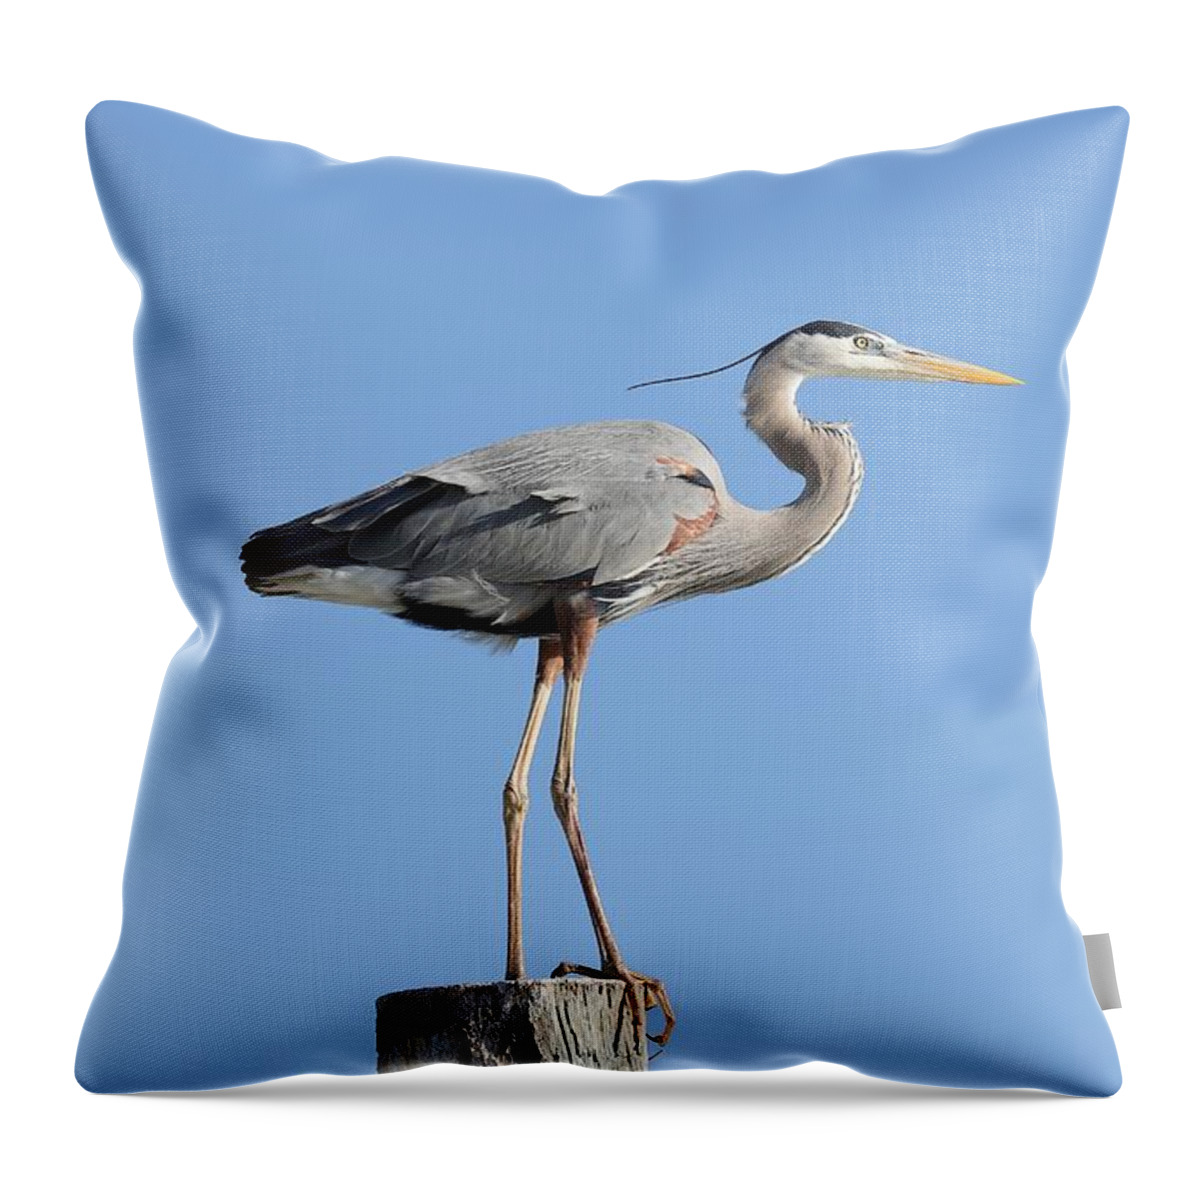 Great Blue Heron Throw Pillow featuring the photograph Elegant Great Blue Heron by Mingming Jiang